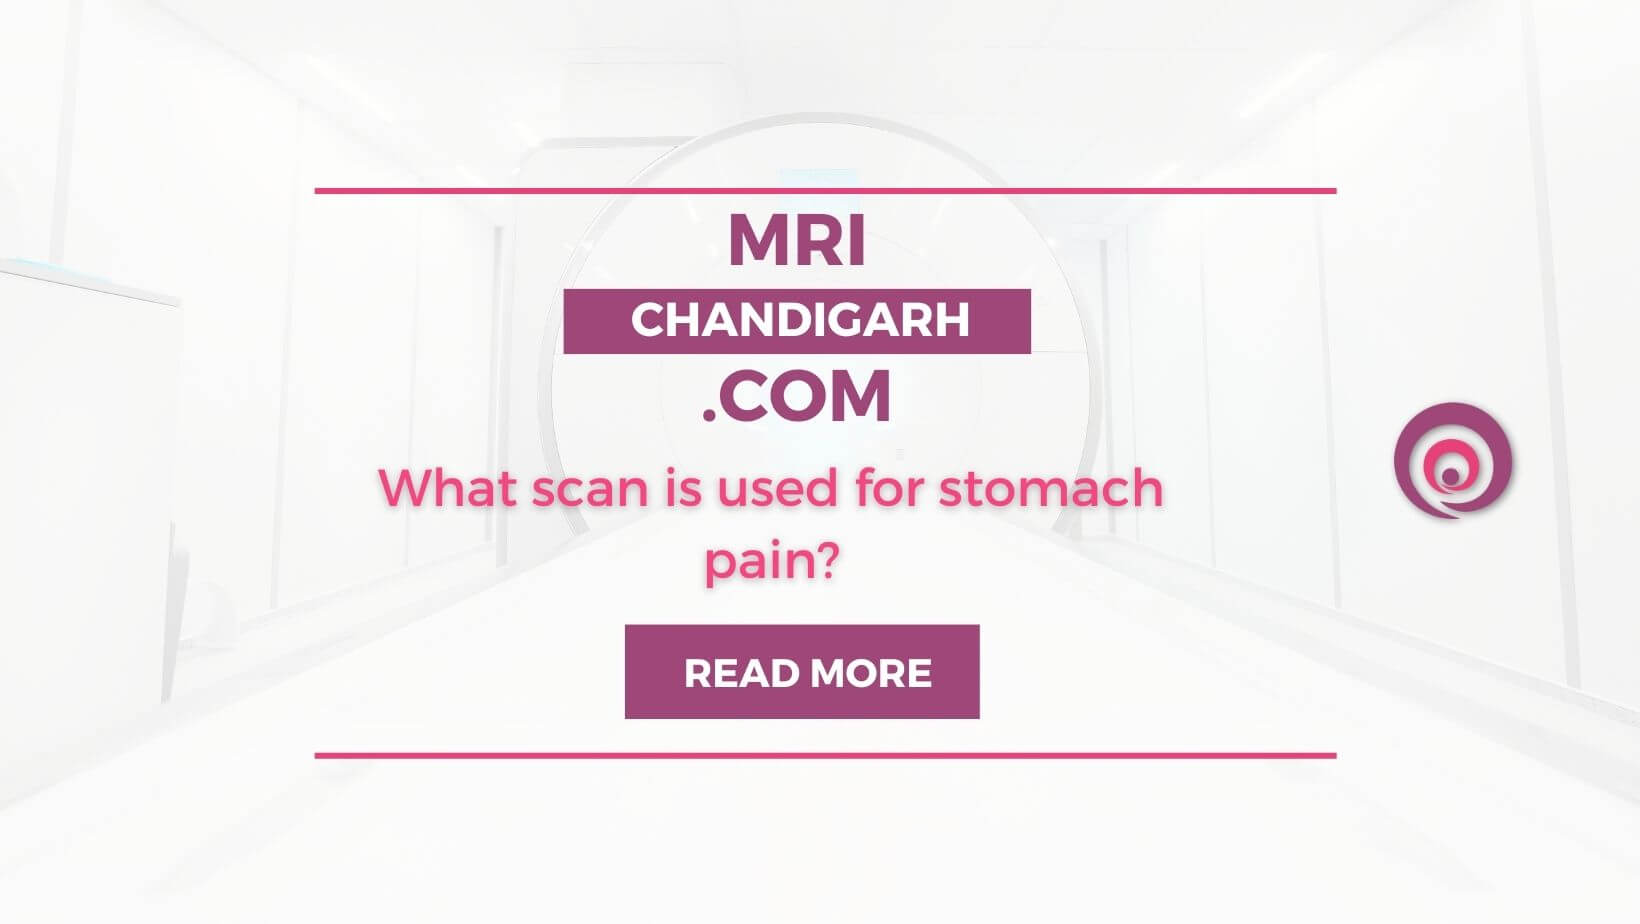 What scan is used for stomach pain?